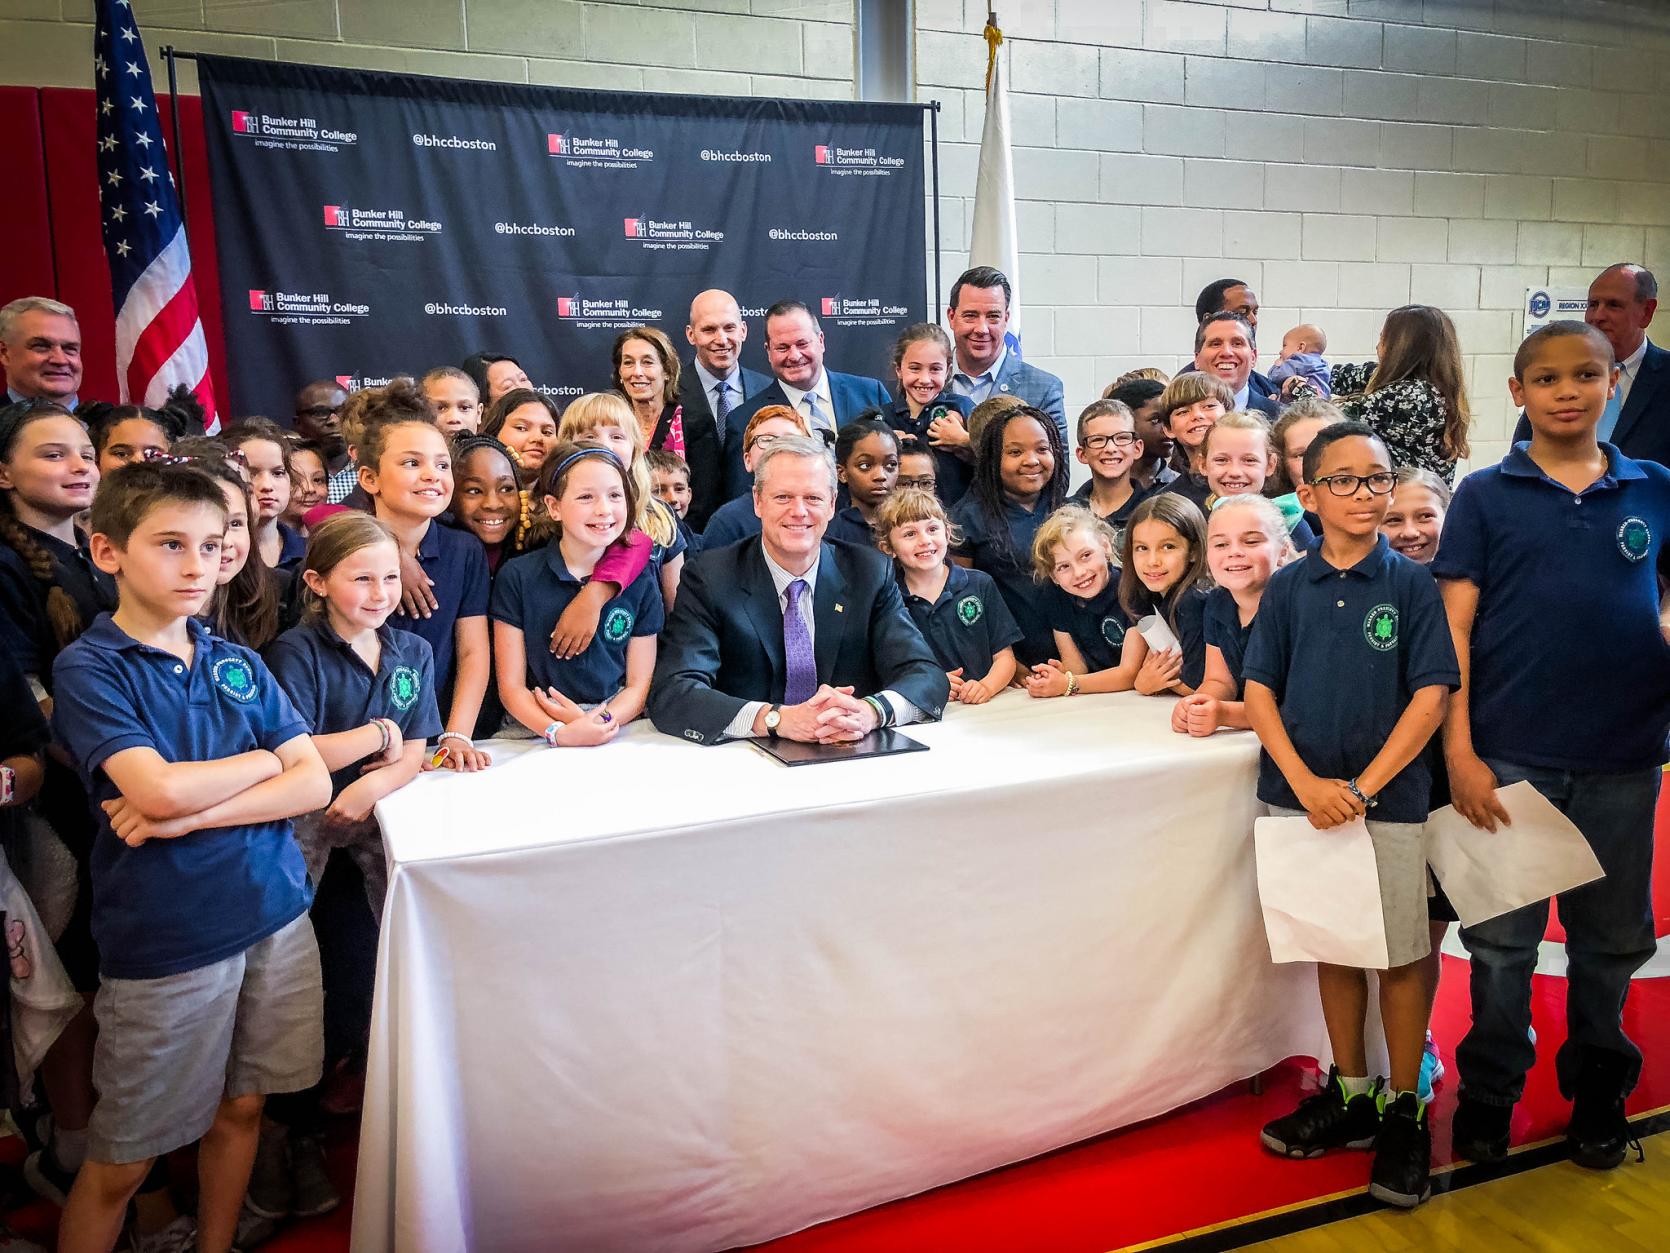 Governor Baker with students at the Life Sciences bill signing.